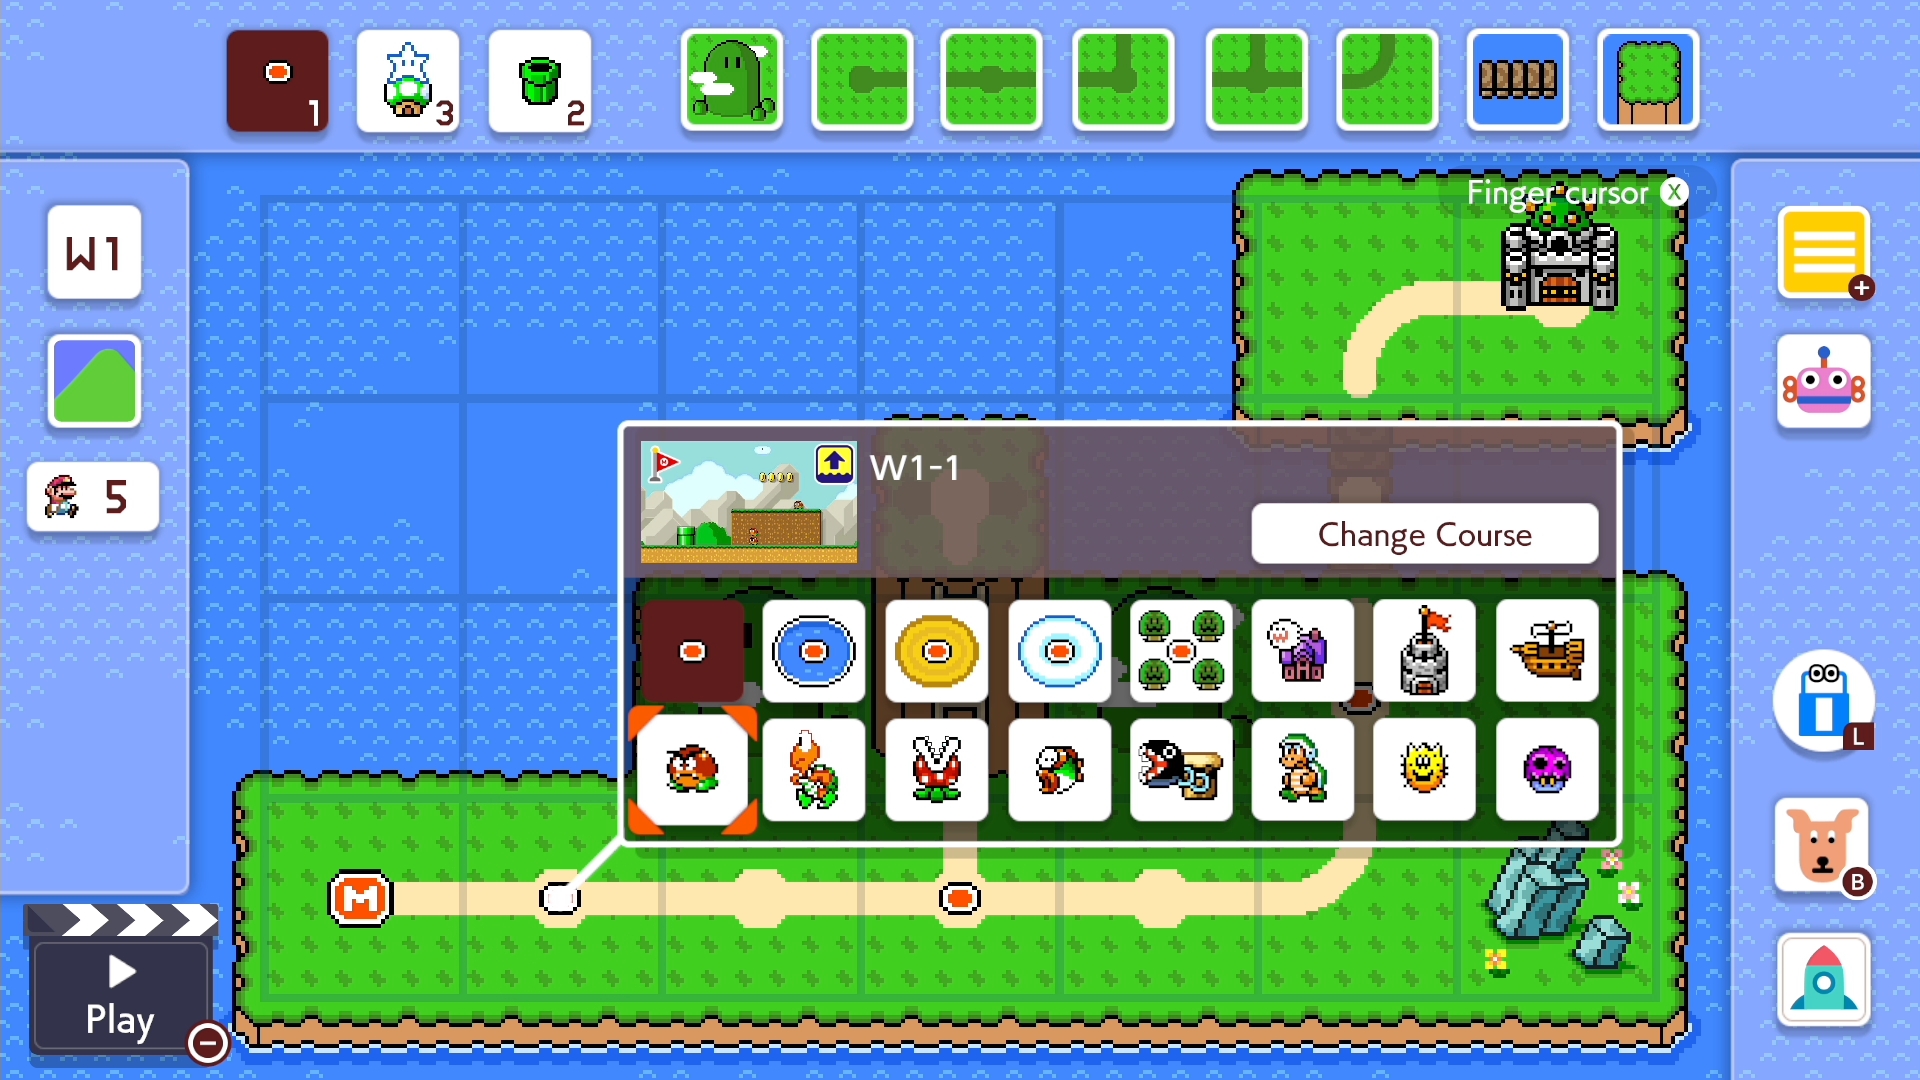 Super Mario Maker 2 Version 3.0 Update Release Date and Contents